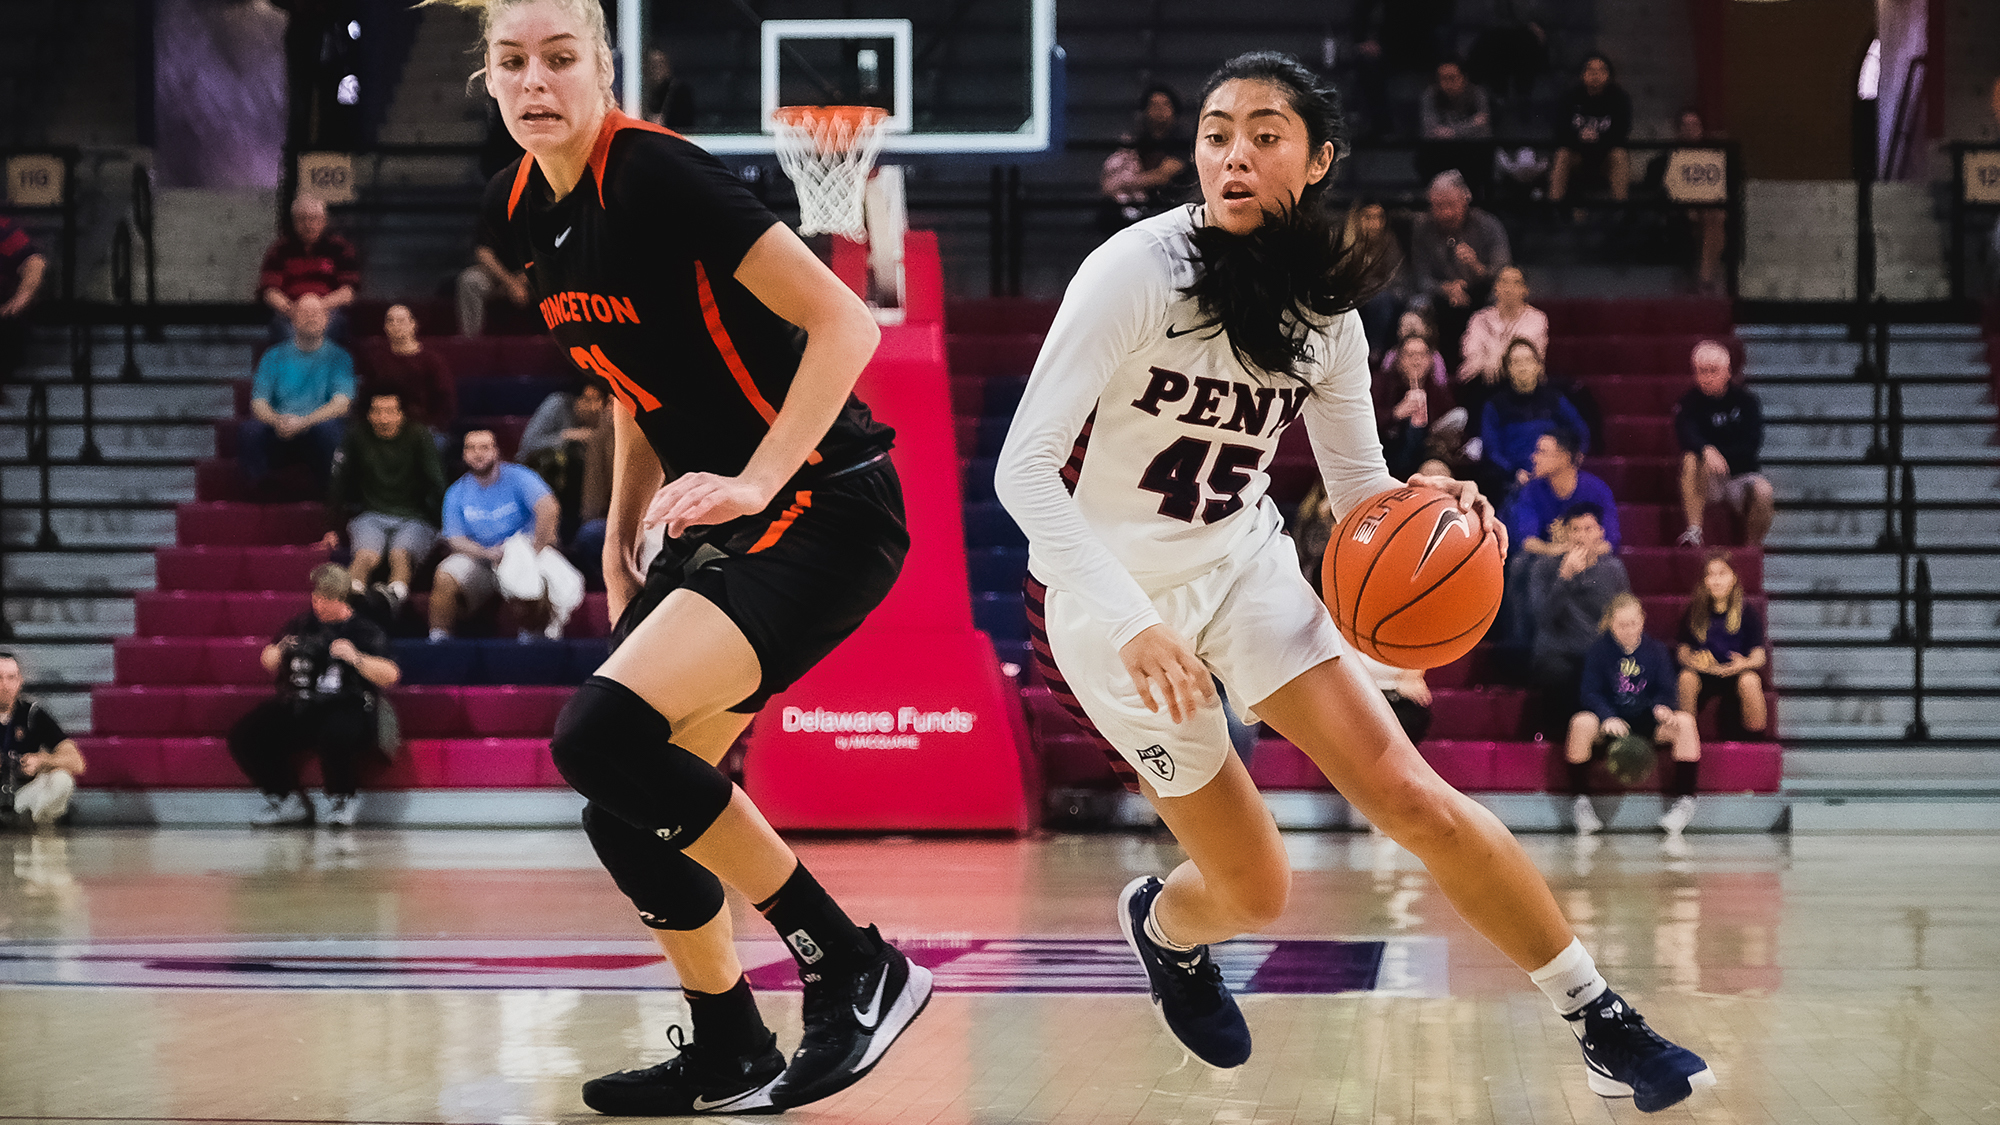 Kayla Padilla drives to the basket with the ball against Princeton at the Palestra.